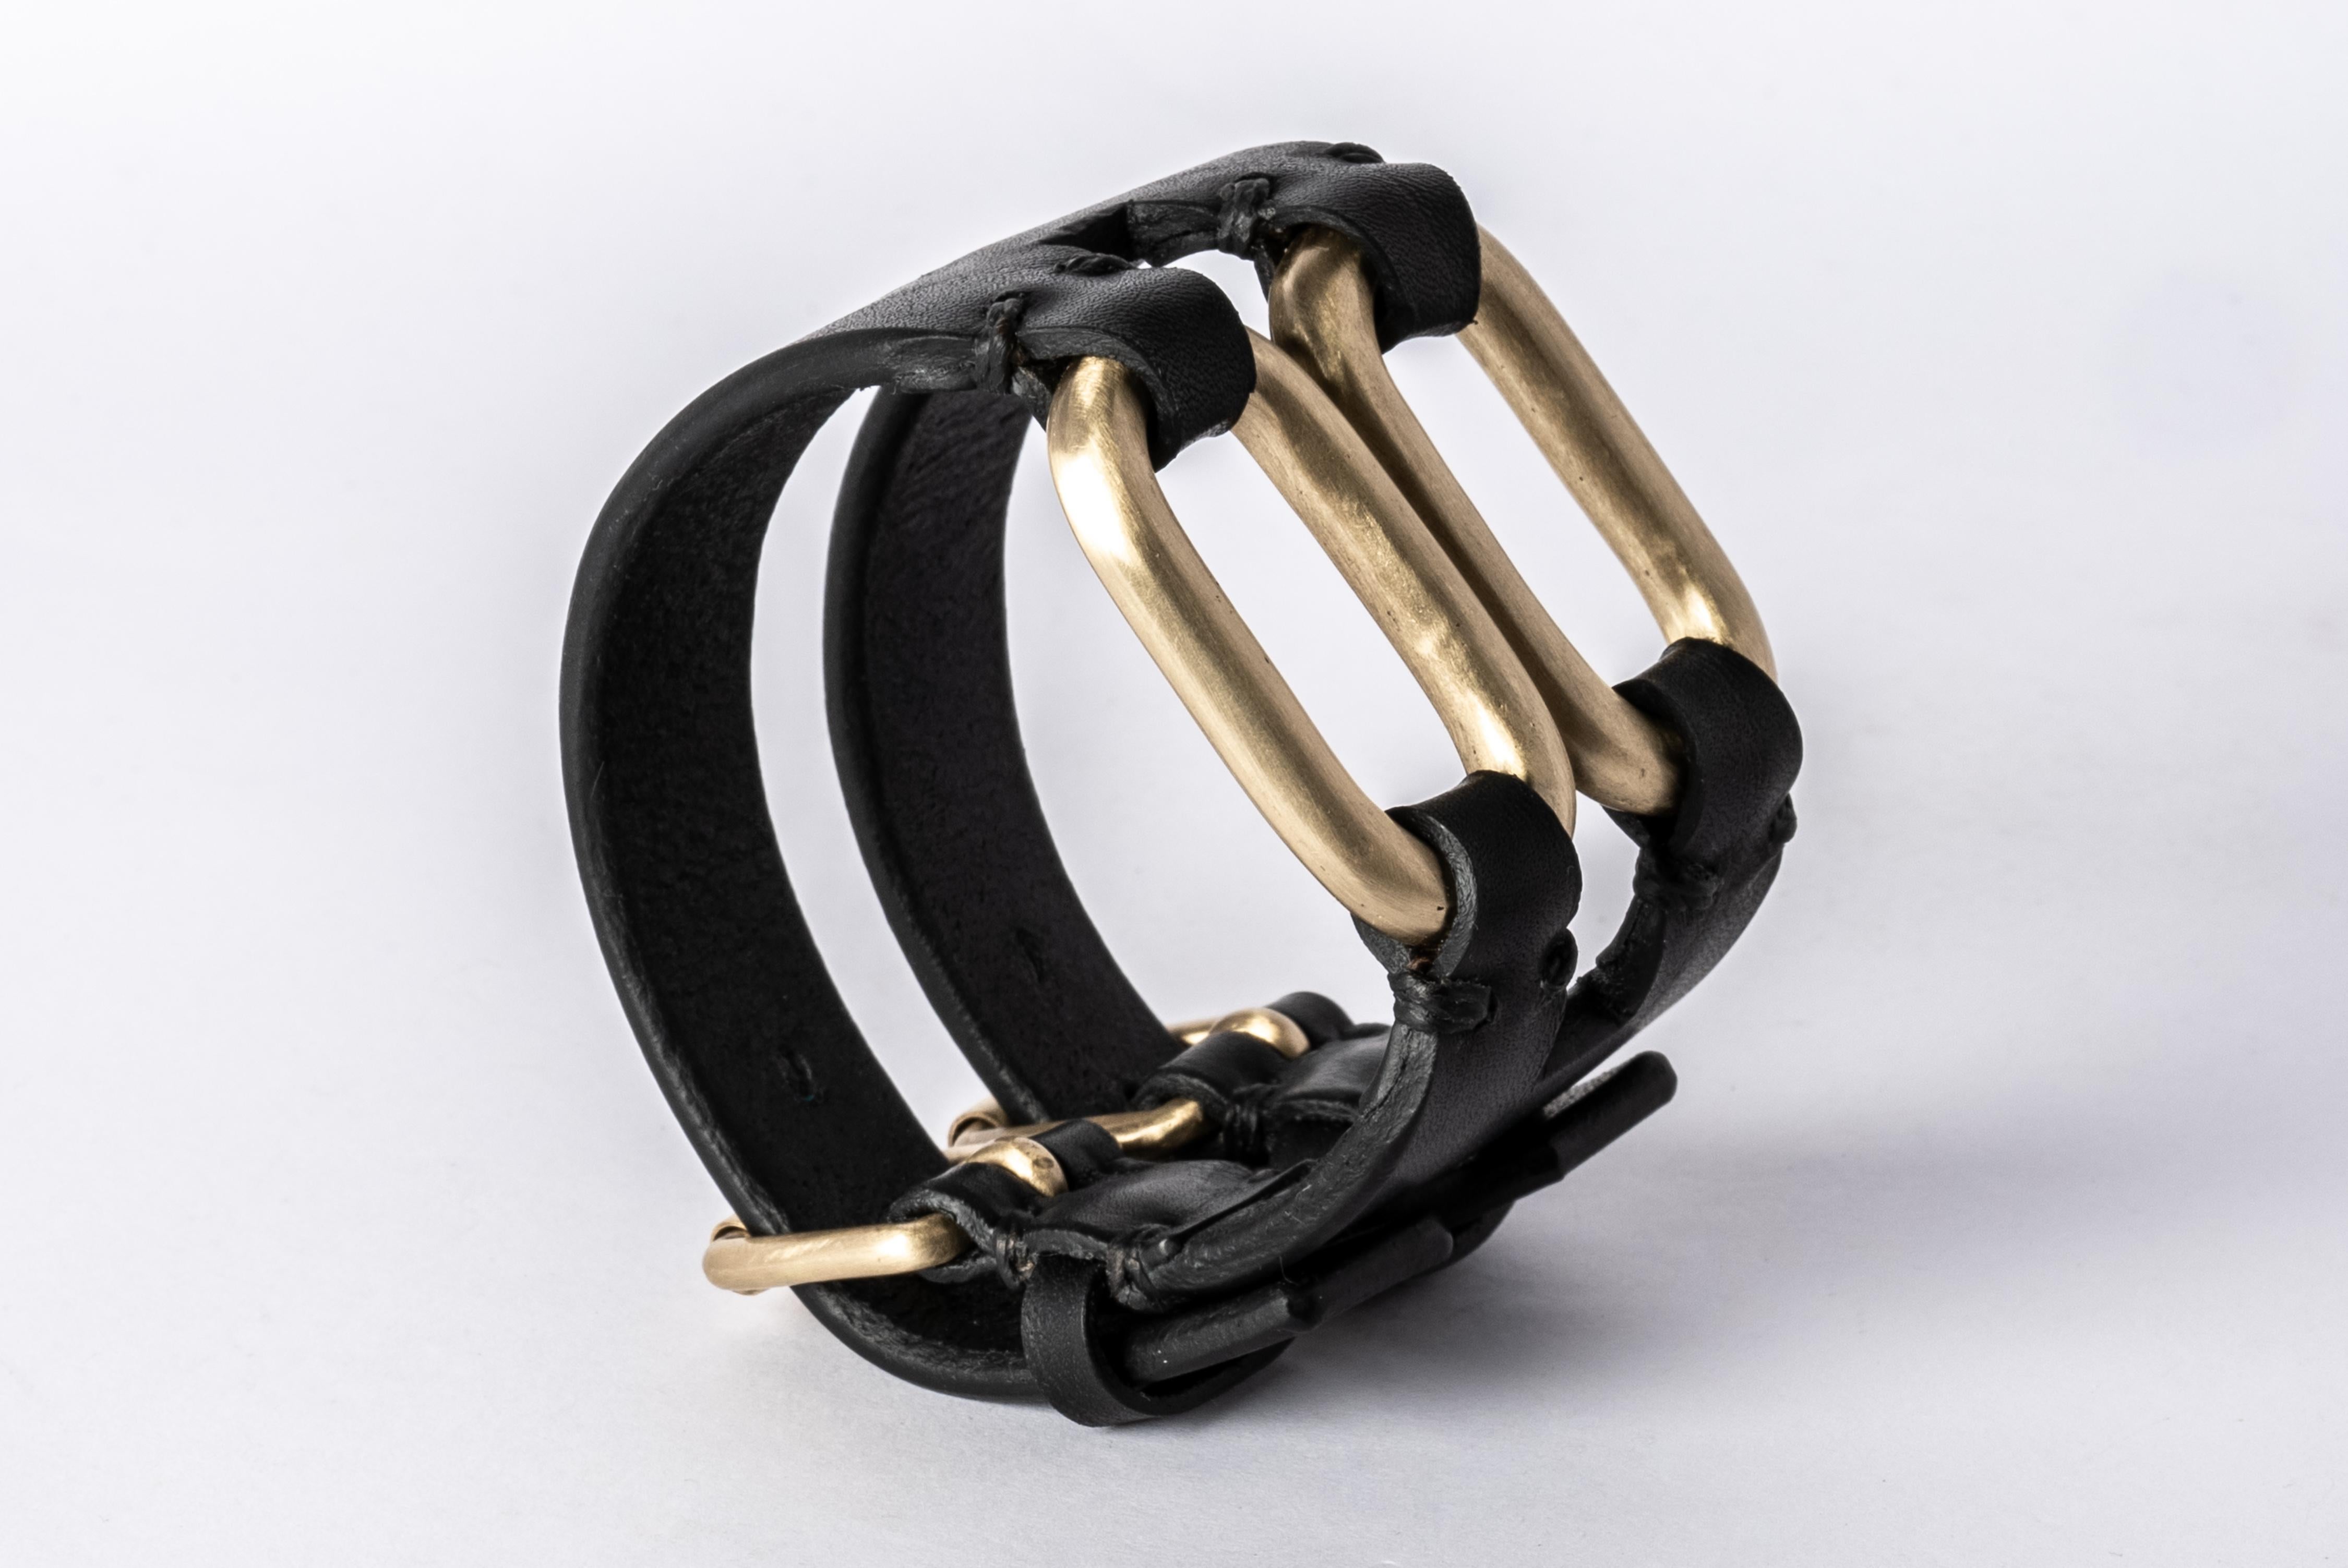 Bracelet in ceramic plated brass and black buffalo leather.
Dimensions:
Bracelet width: 50 mm
Chain link size (L × H): 50 mm × 25 mm
Weight: 75 grams